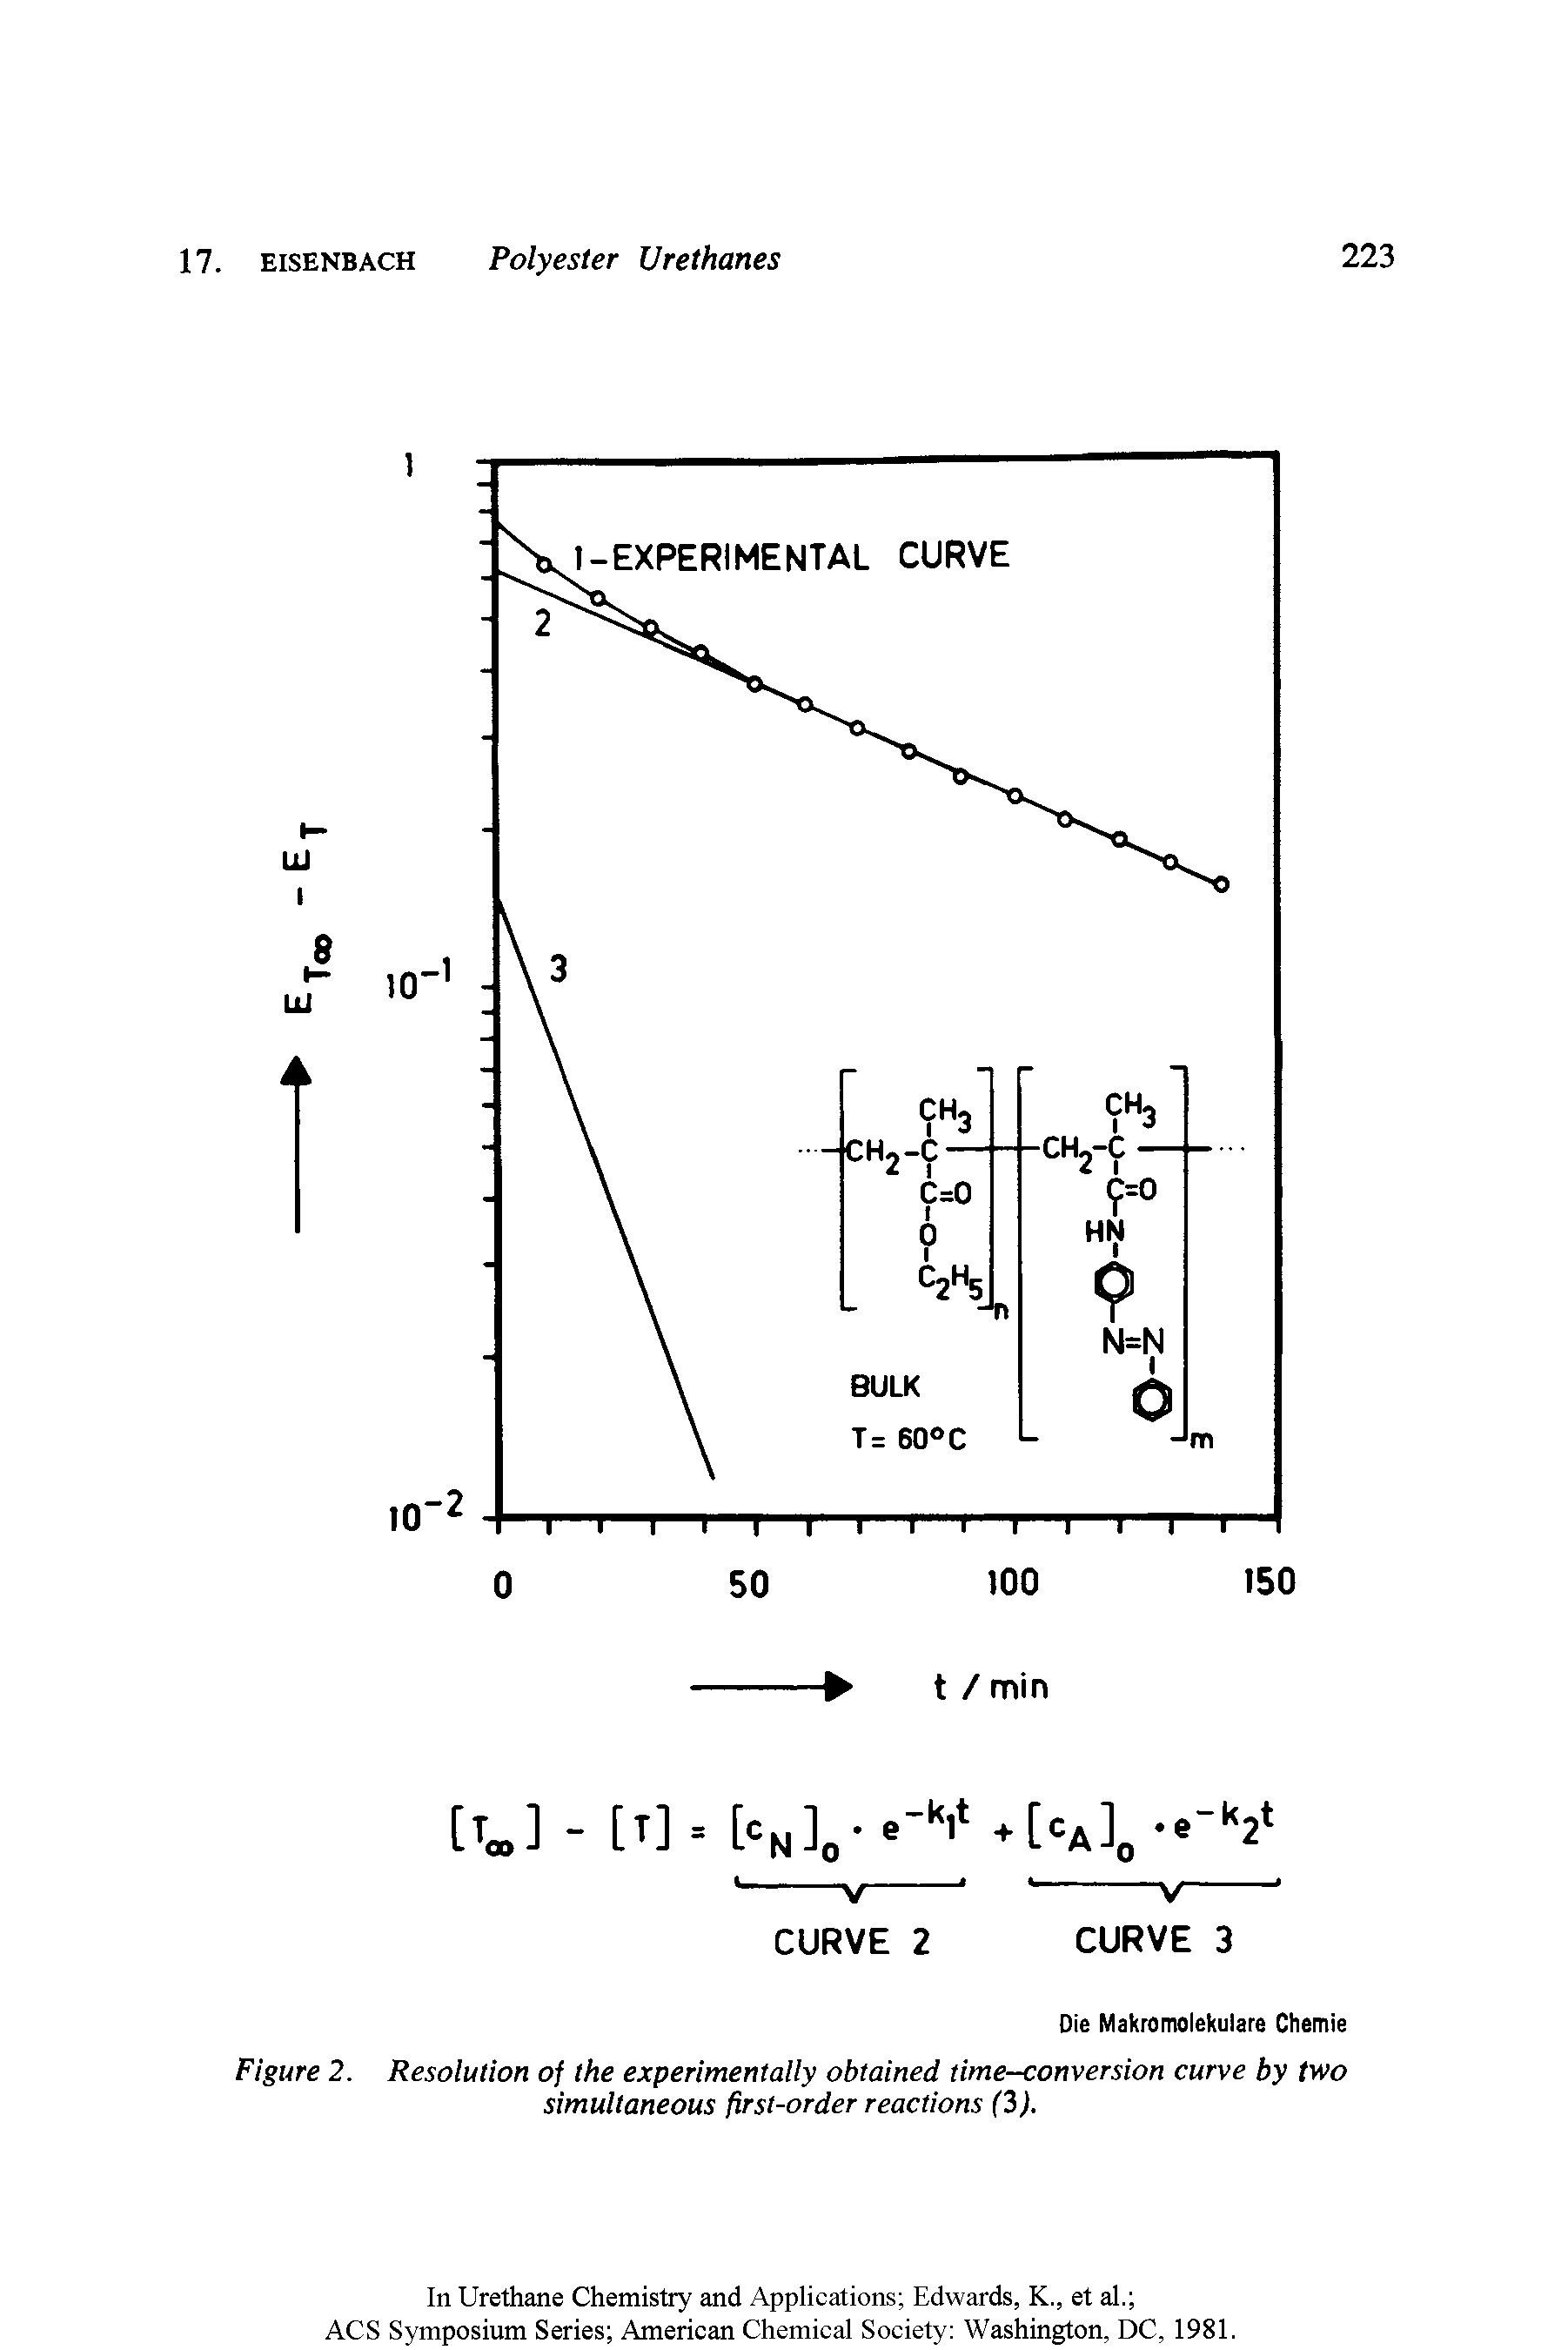 Figure 2. Resolution of the experimentally obtained time-conversion curve by two simultaneous first-order reactions (3).